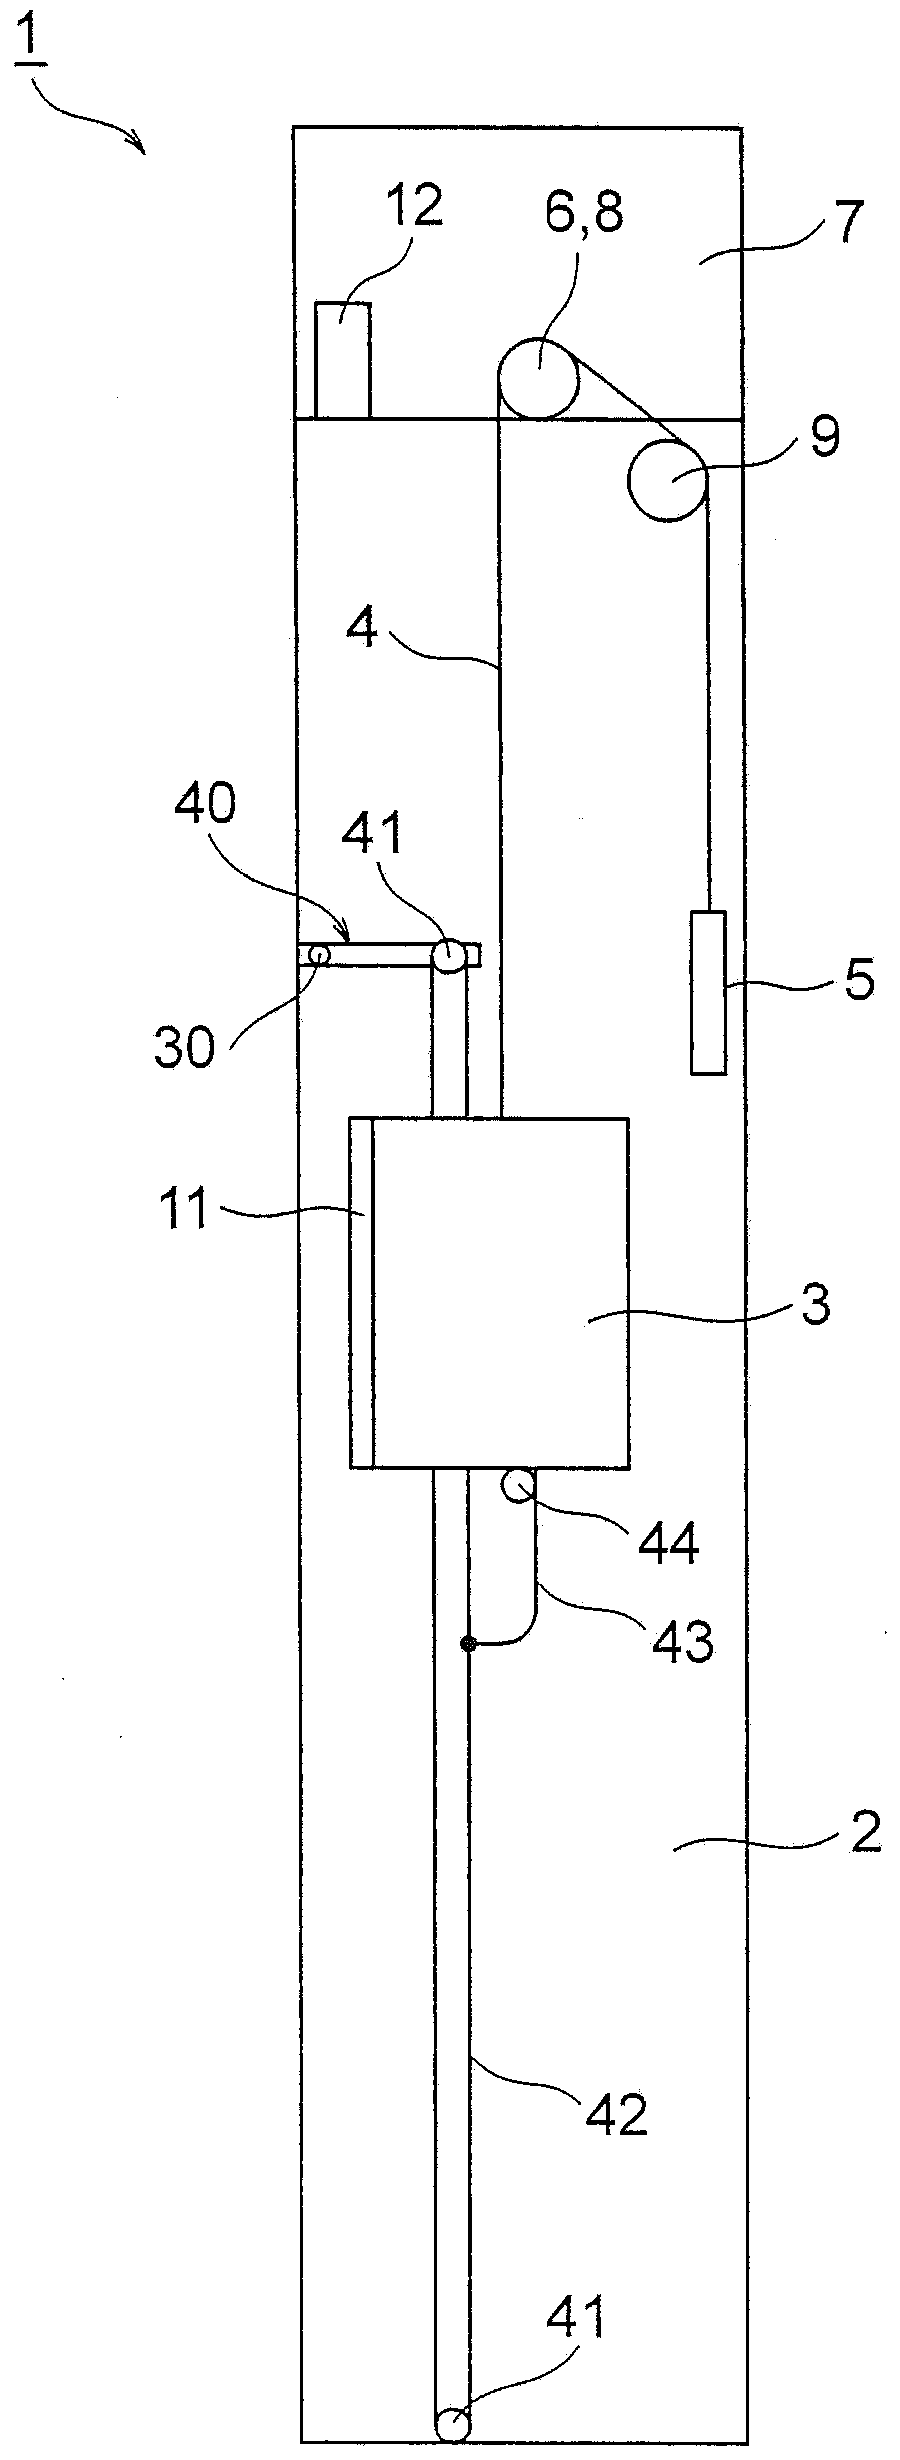 Elevator cable swing suppression system